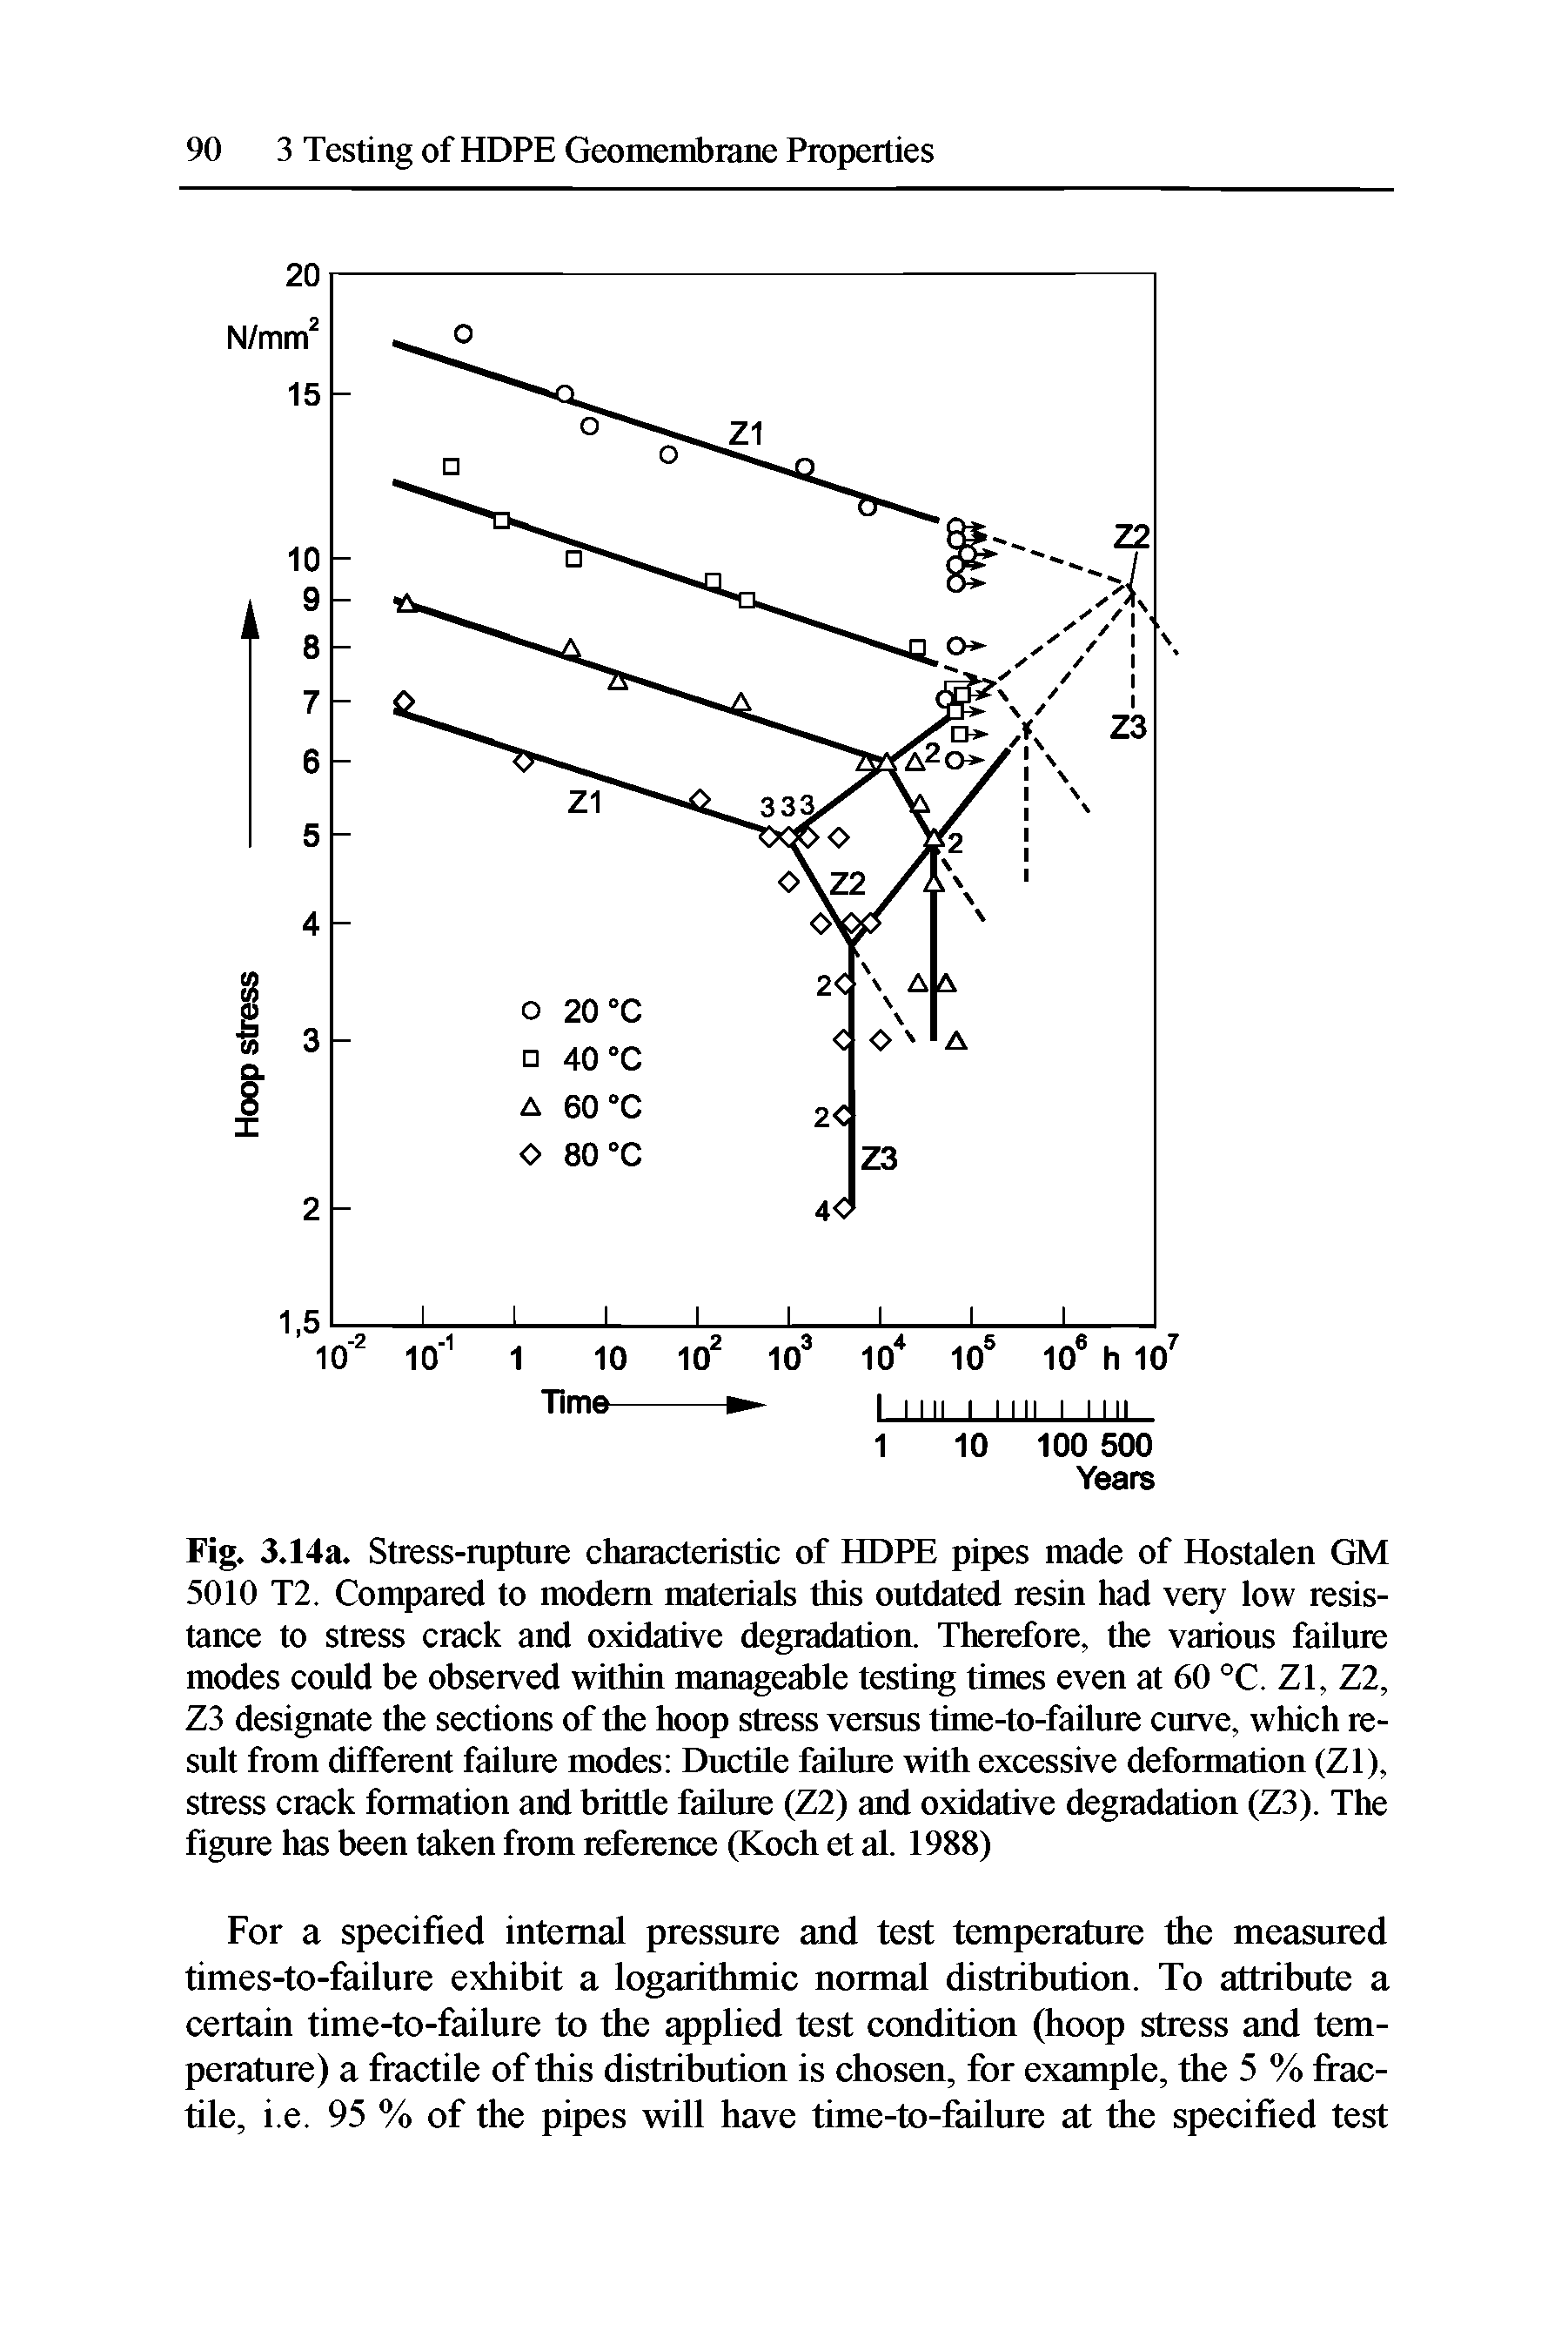 Fig. 3.14a. Stress-rapture characteristic of HDPE pipes made of Hostalen GM 5010 T2. Compared to modem materials this outdated resin had very low resistance to stress crack and oxidative degradation. Therefore, the various failure modes could be observed within manageable testing times even at 60 °C. Zl, Z2, Z3 designate the sections of the hoop stress versus time-to-failure curve, which result from different failure modes Ductile failure with excessive deformation (Zl), stress crack formation and brittle failure (Z2) and oxidative degradation (Z3). The figure has been taken from reference (Koch et al. 1988)...